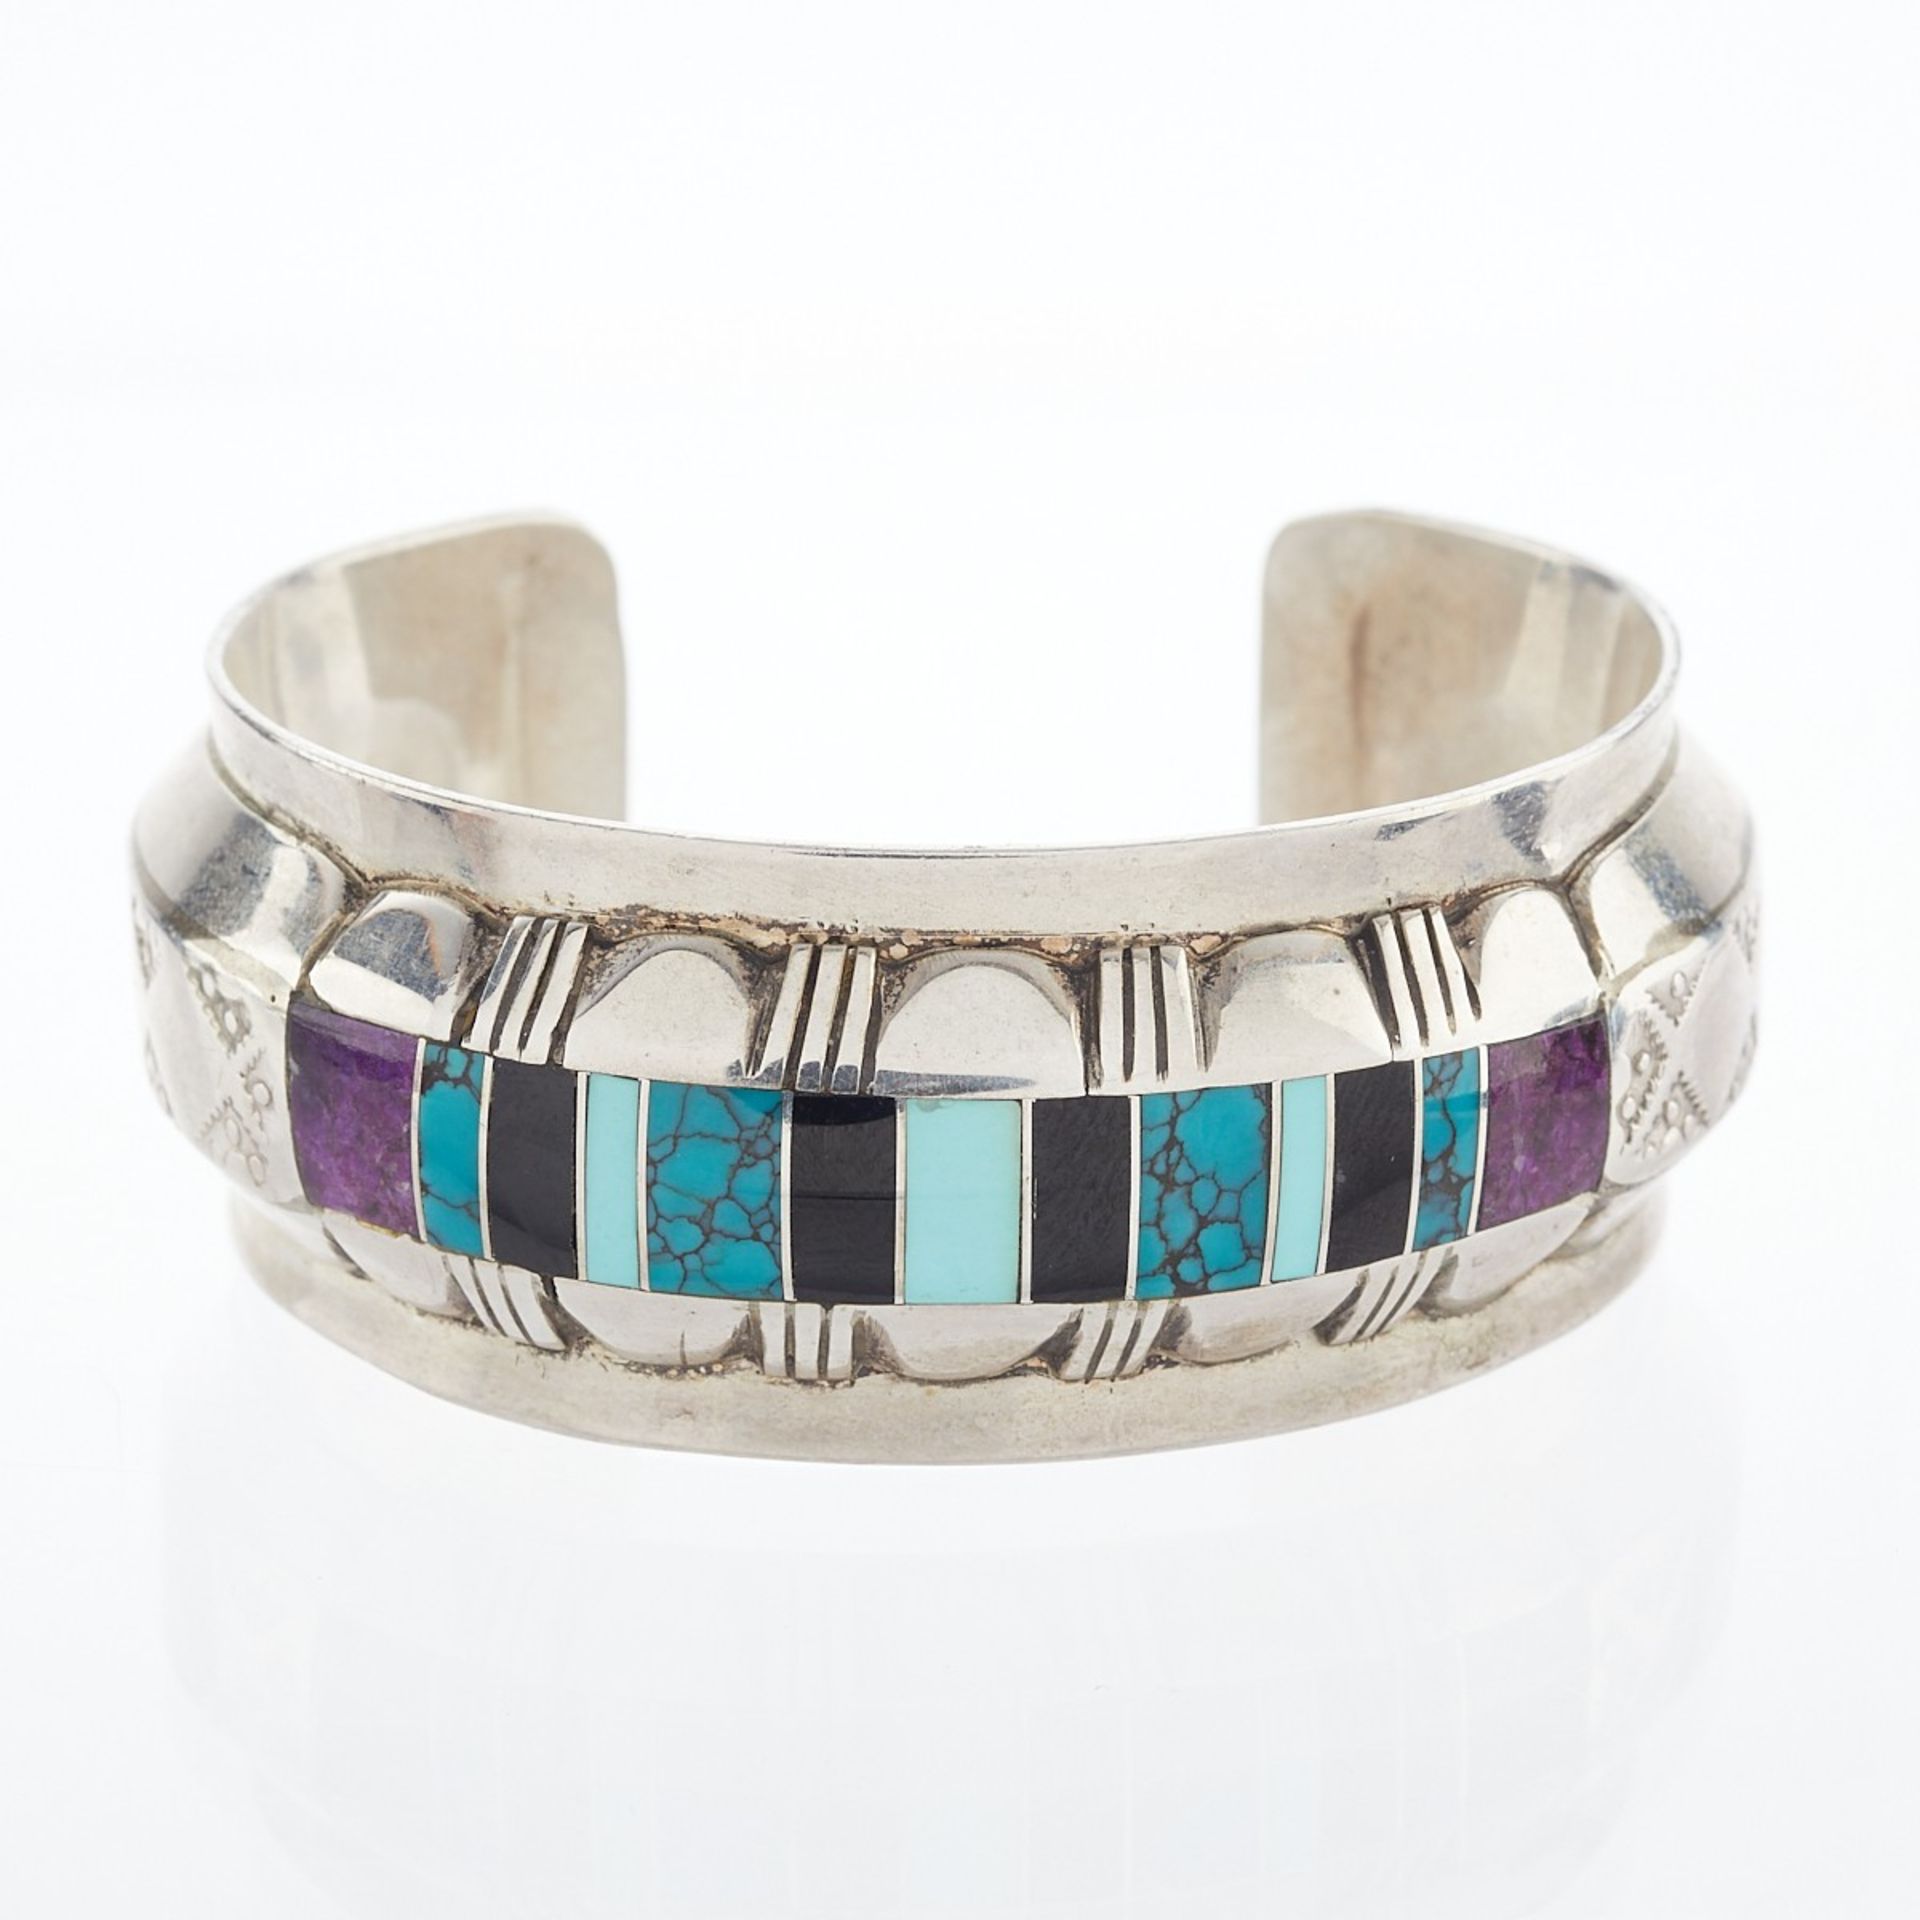 Southwest Sterling & Turquoise Cuff Bracelet - Image 2 of 9